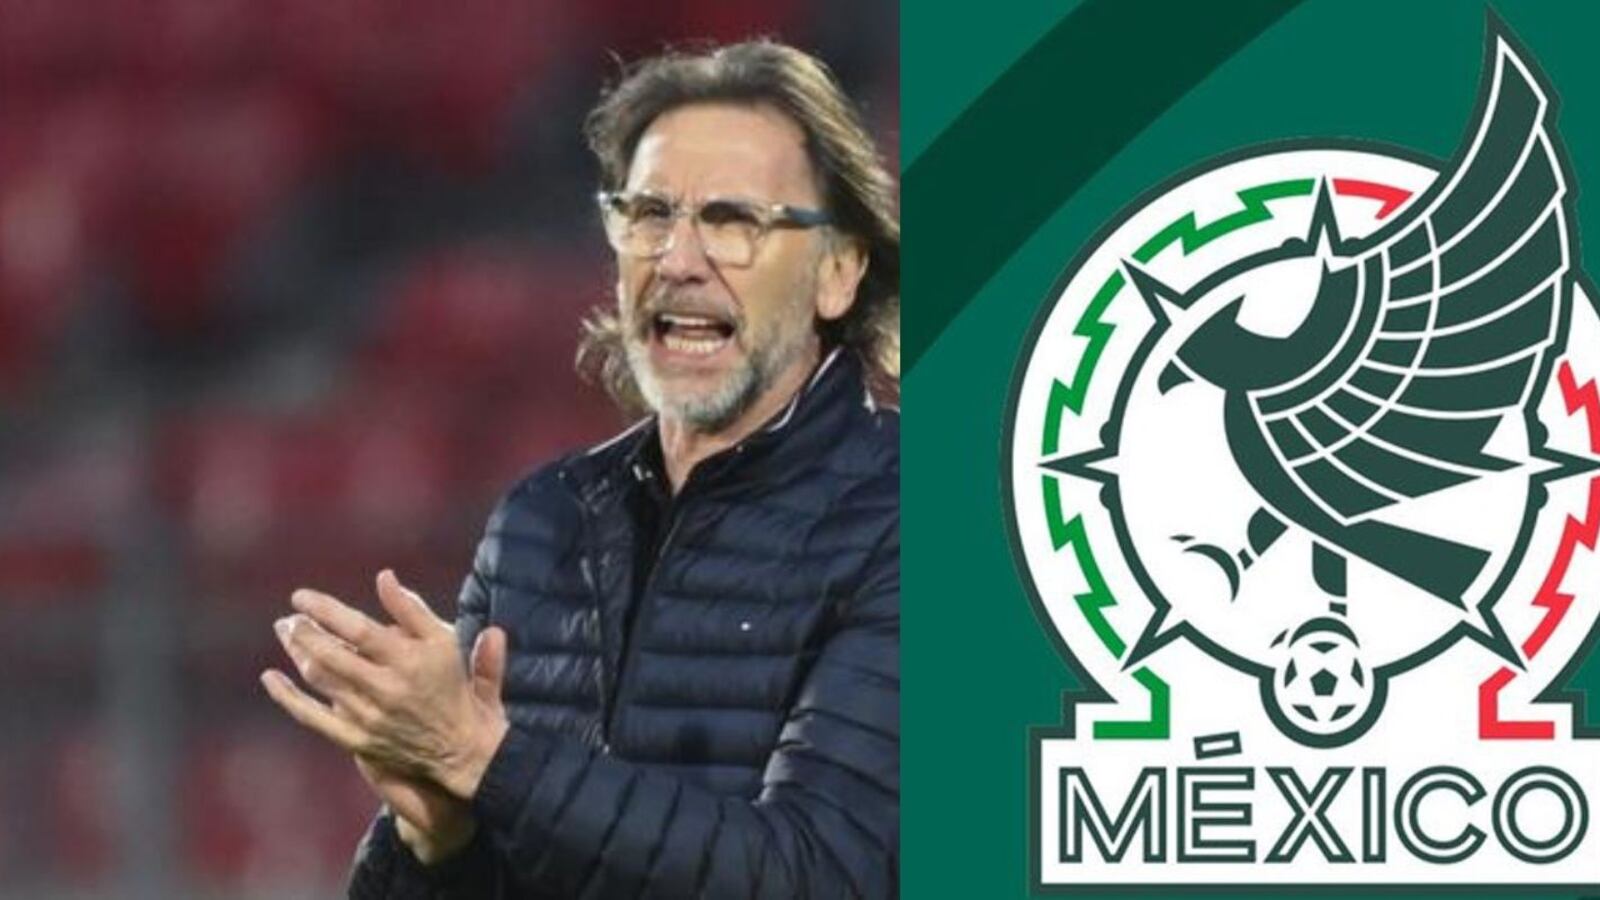 The millionaire amount offered by the FMF to Ricardo Gareca to train the Mexican National Team